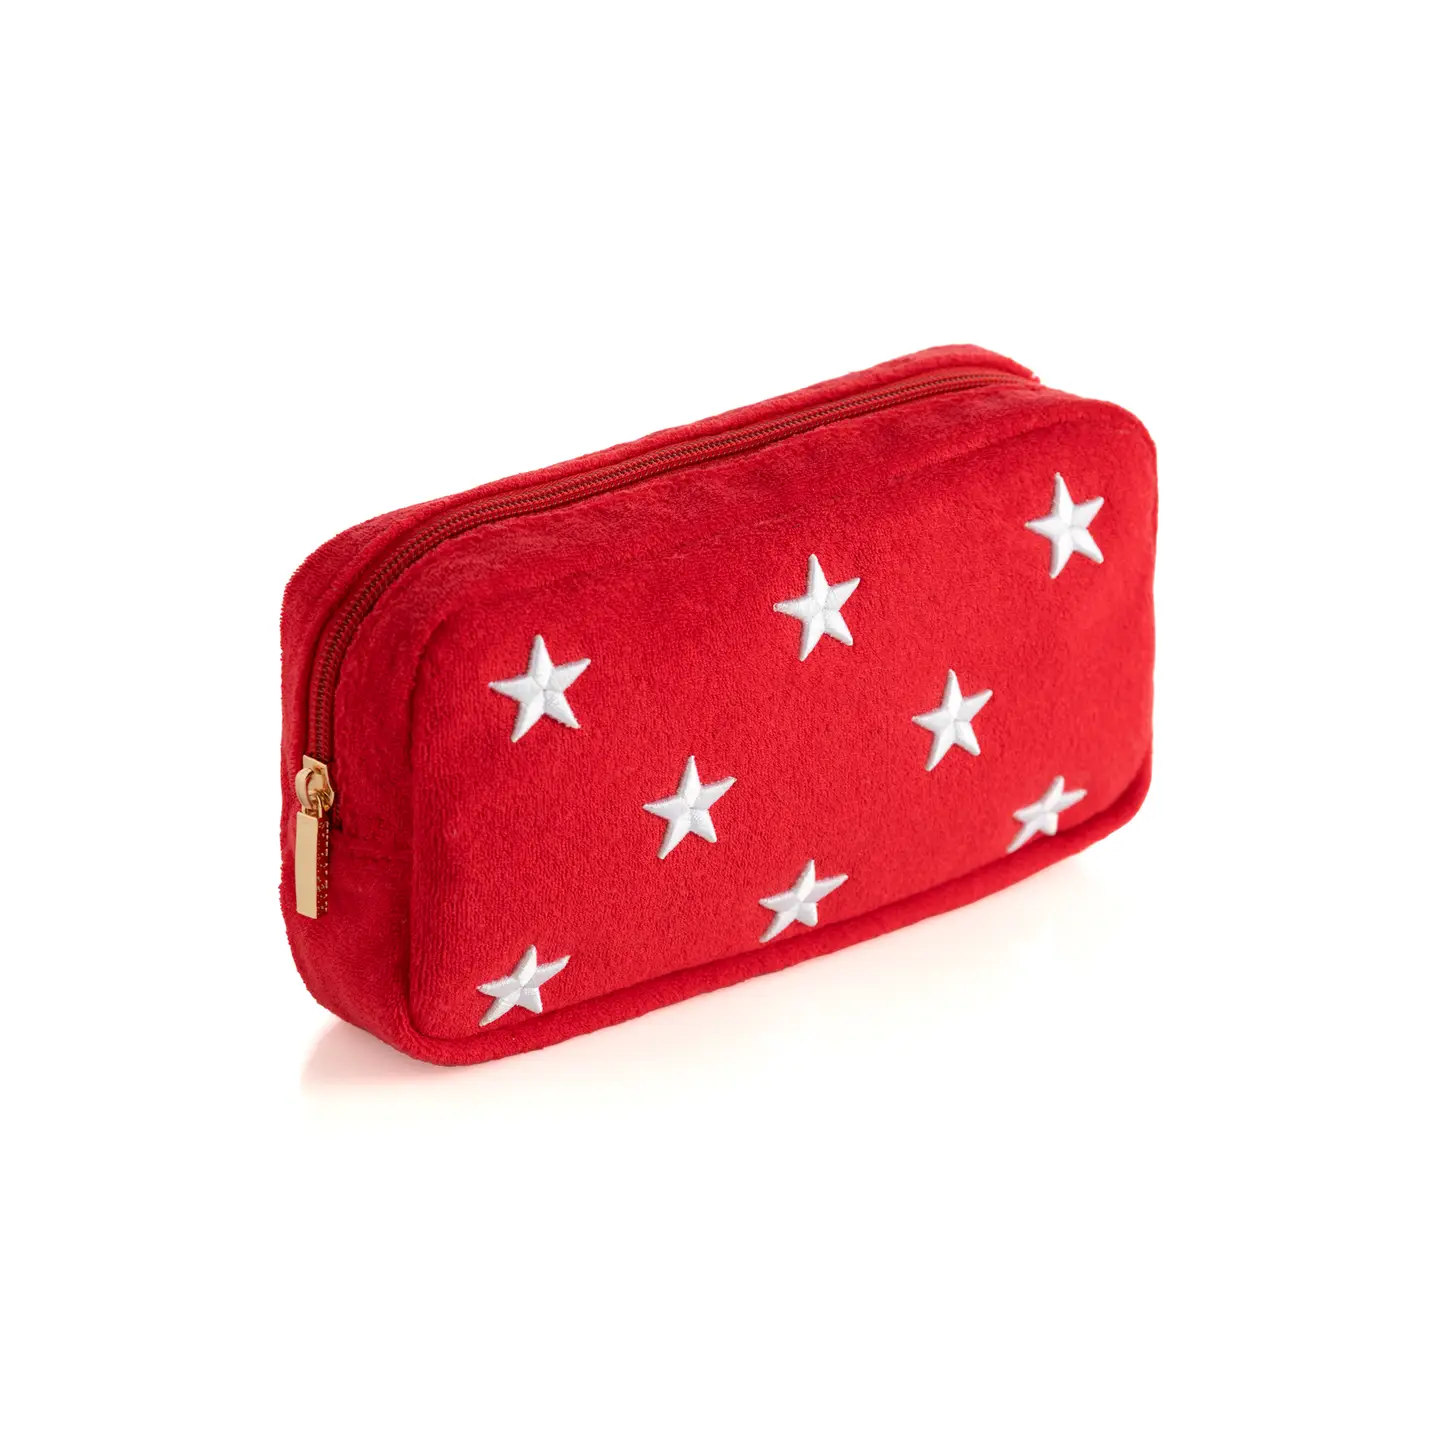 SOL STARS ZIP POUCH IN RED